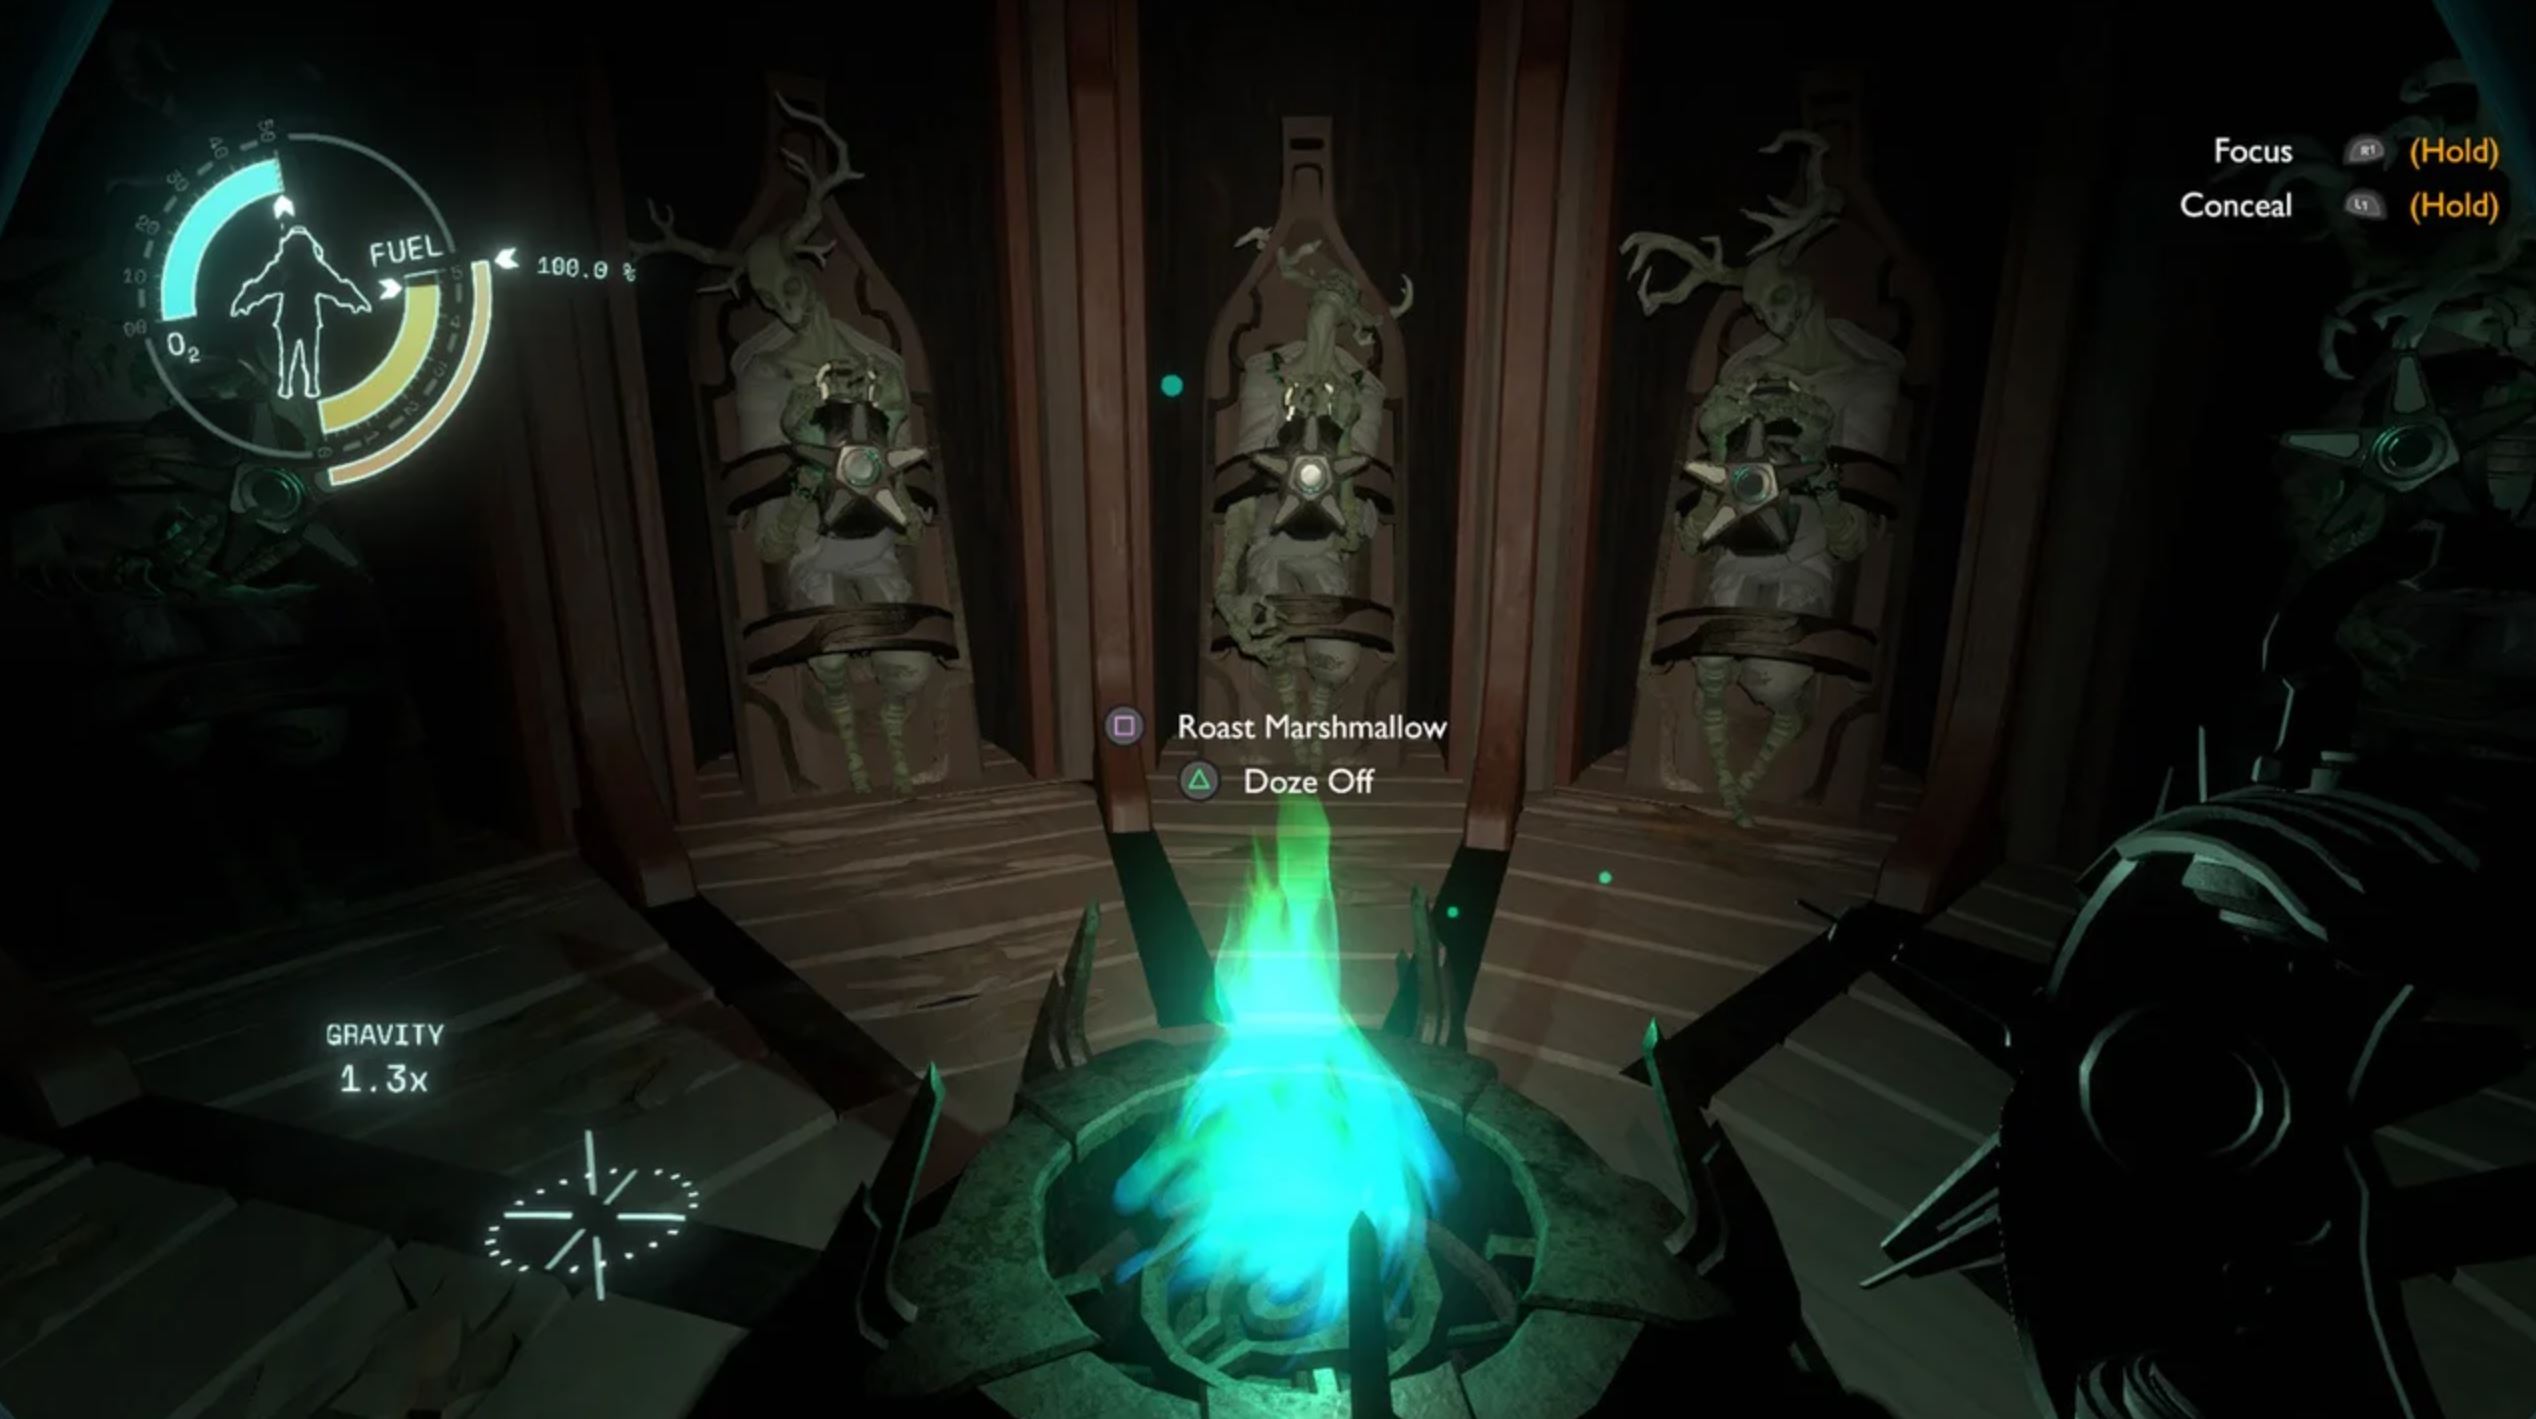 Screenshot from Outer Wilds. A green fire at the center of a room, surrounded by the remains of tall aliens. There are several UI elements, including two at the center of the screen prompting 'roast marshmallow' and 'doze off'.